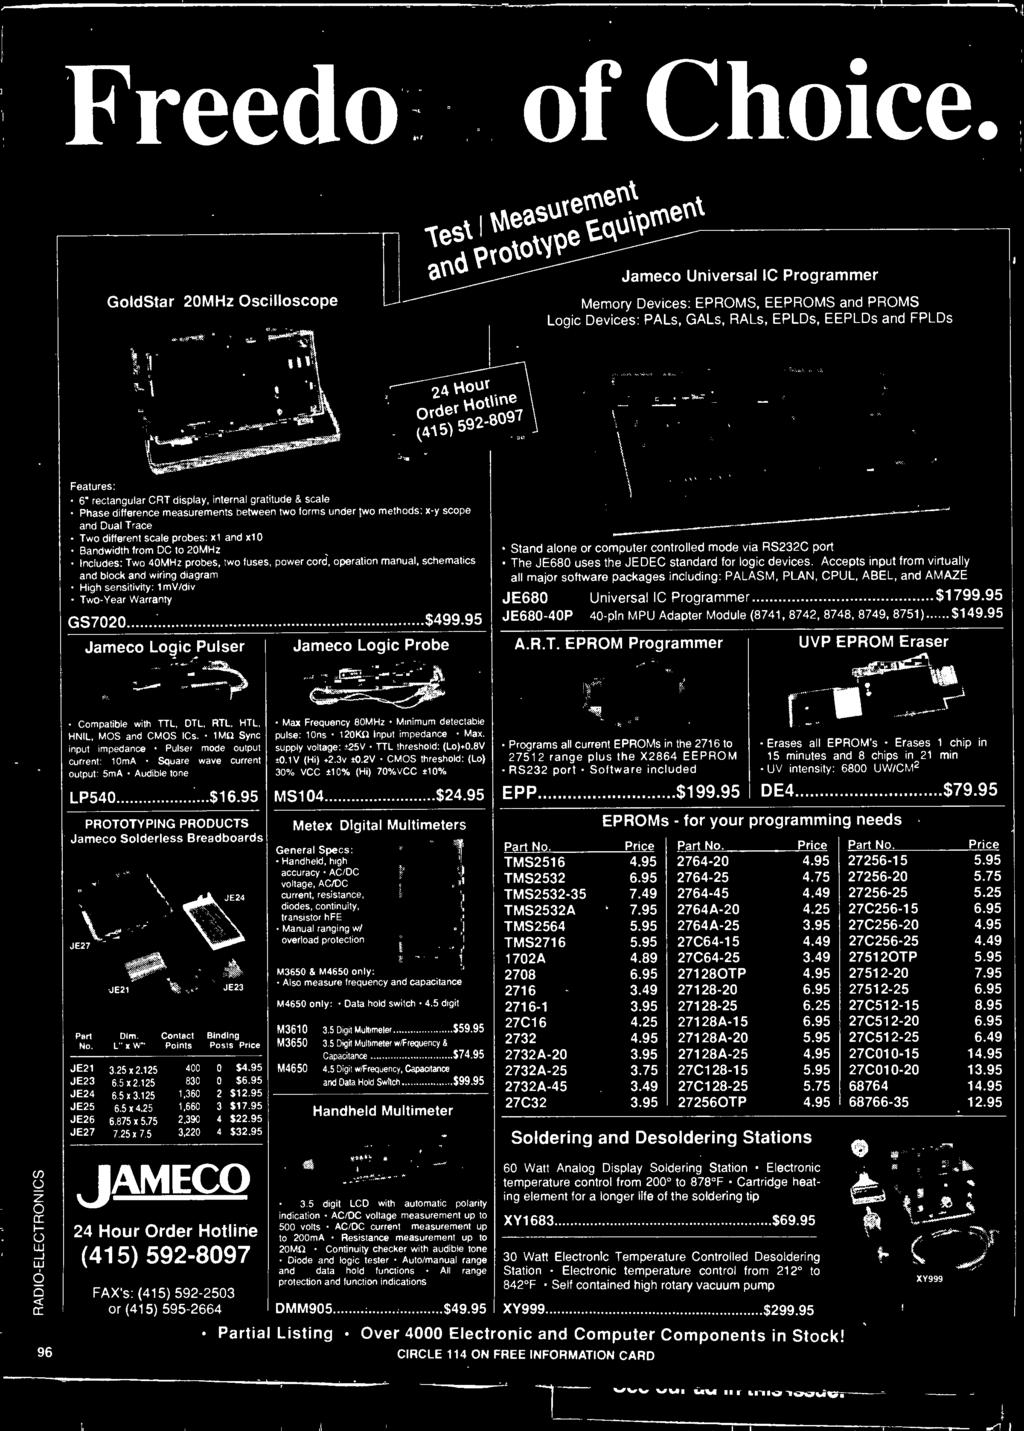 Warranty GS7020 $499.95 Jameco Logic Pulser Jameco Logic Probe Stand alone or computer controlled mode via RS232C port The JE680 uses the JEDEC standard for logic devices.